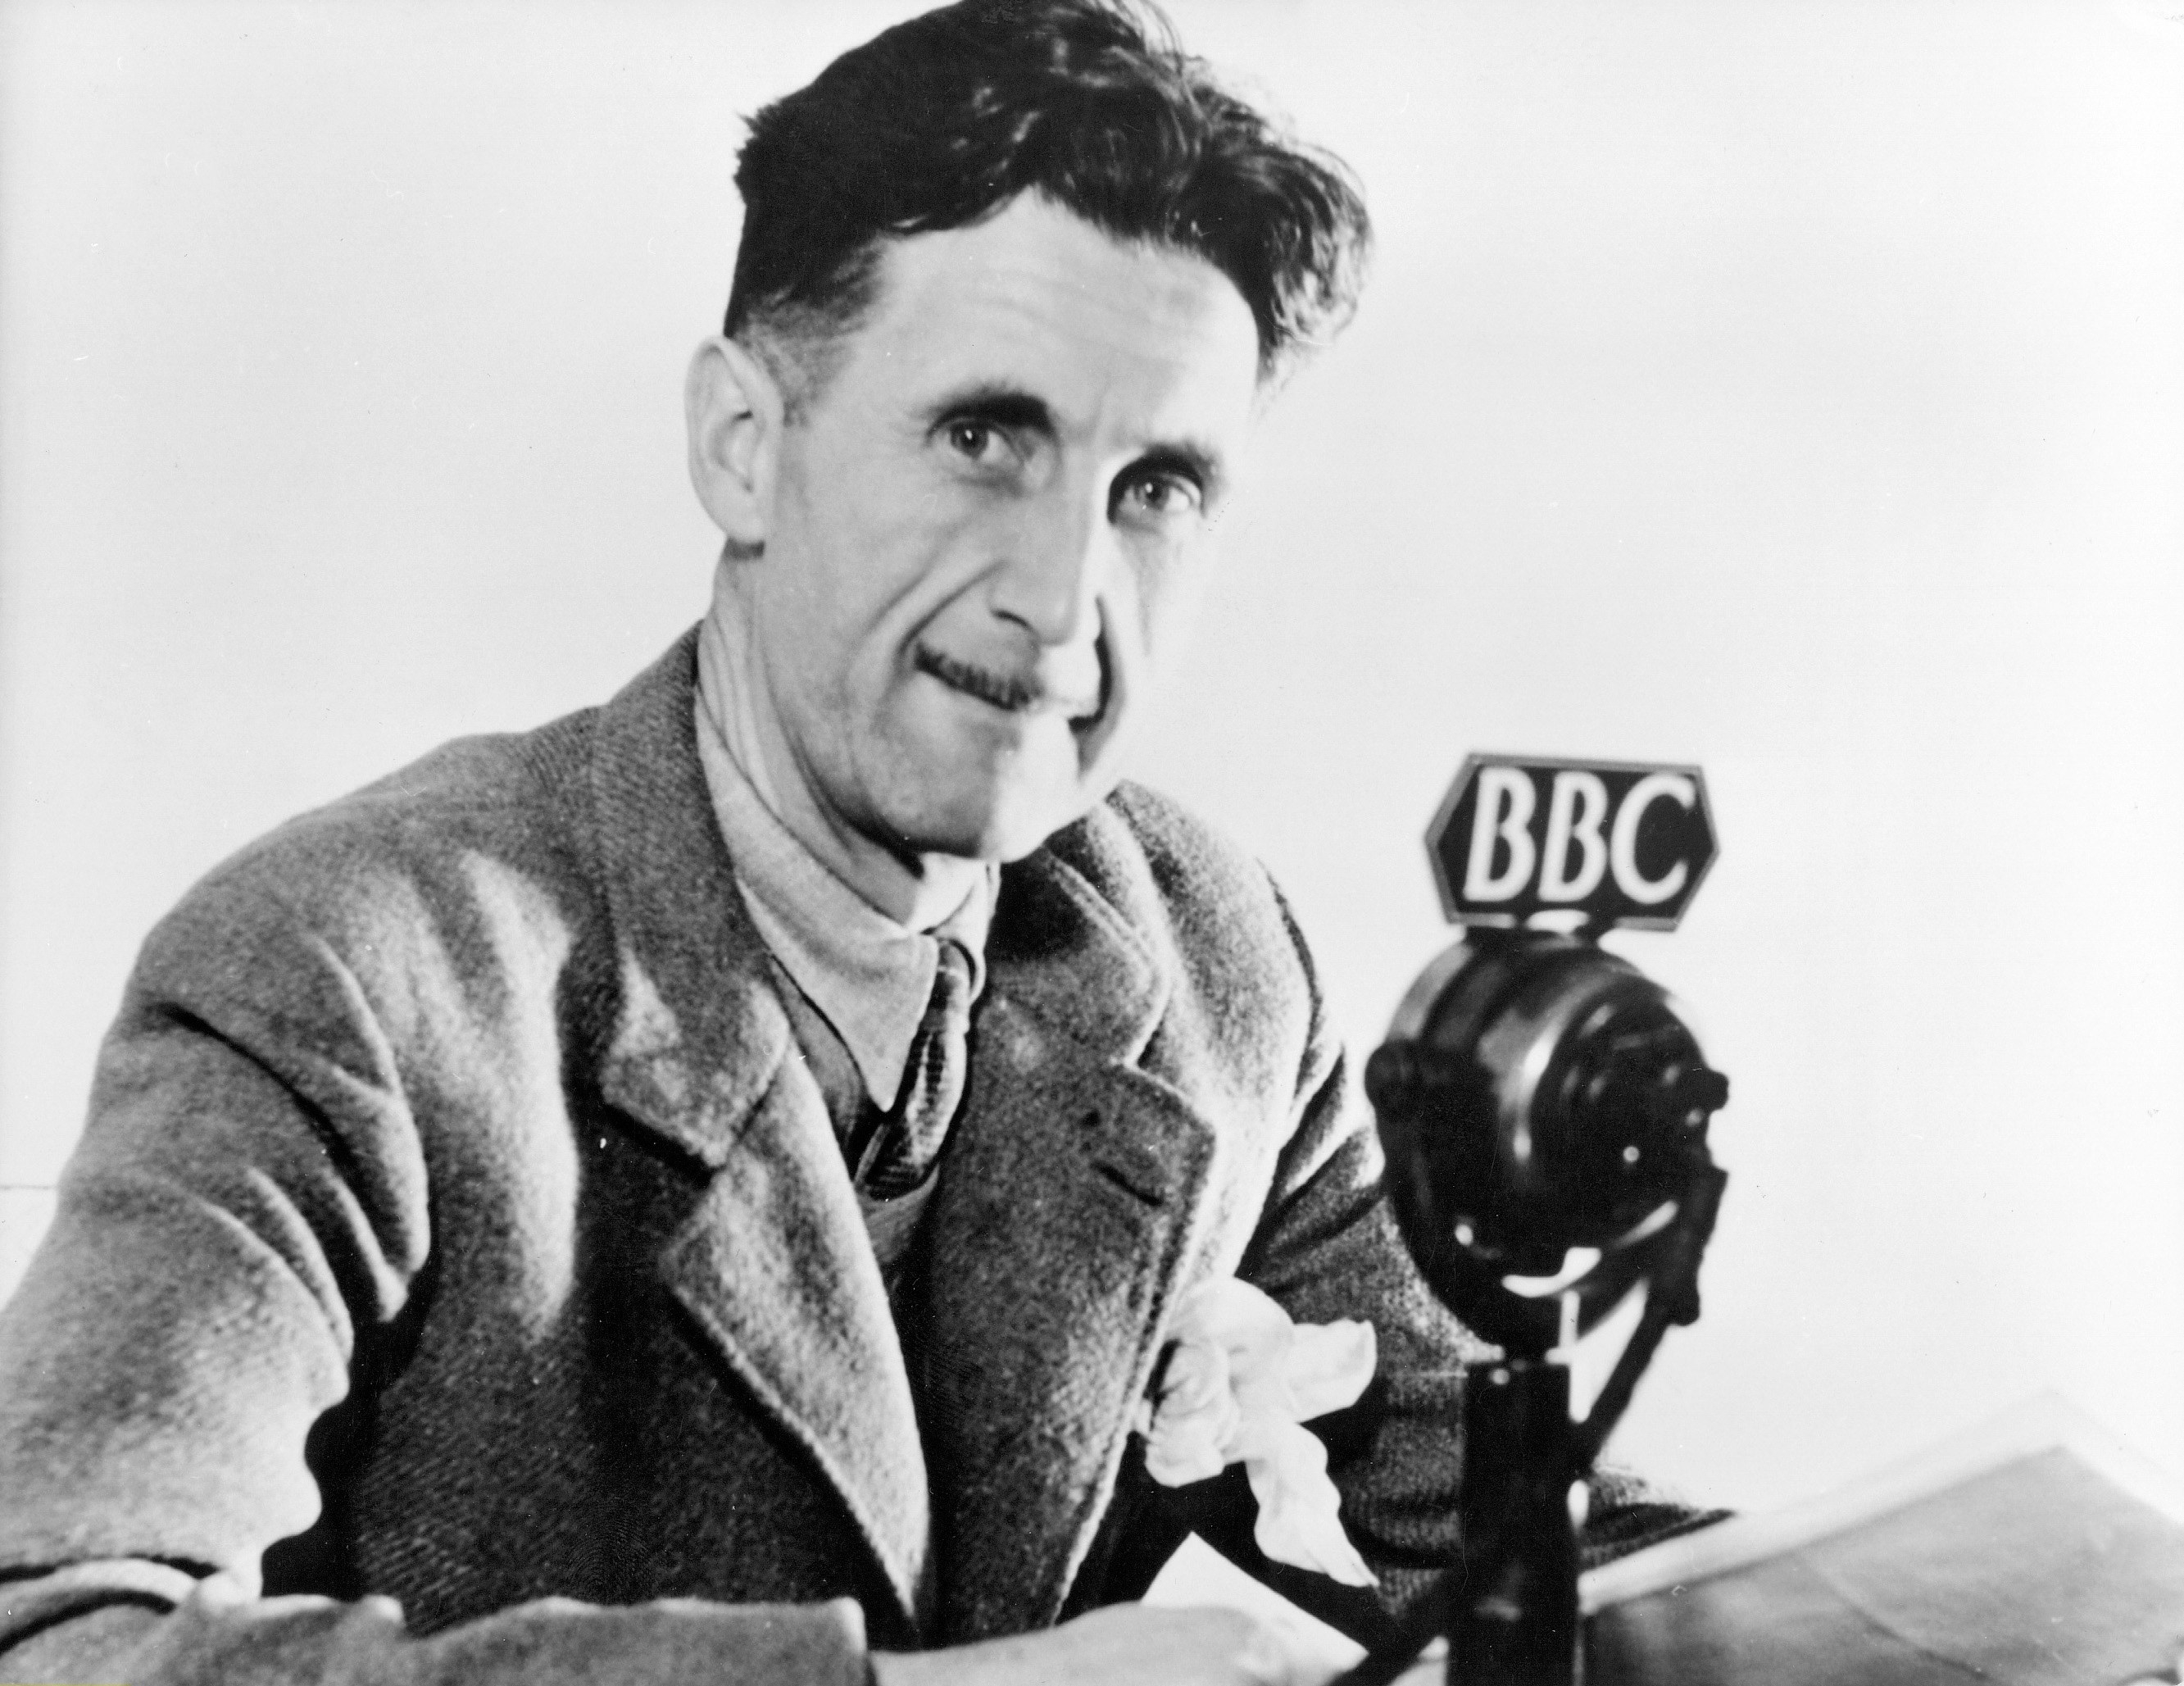 George Orwell sitting in front of a BBC microphone